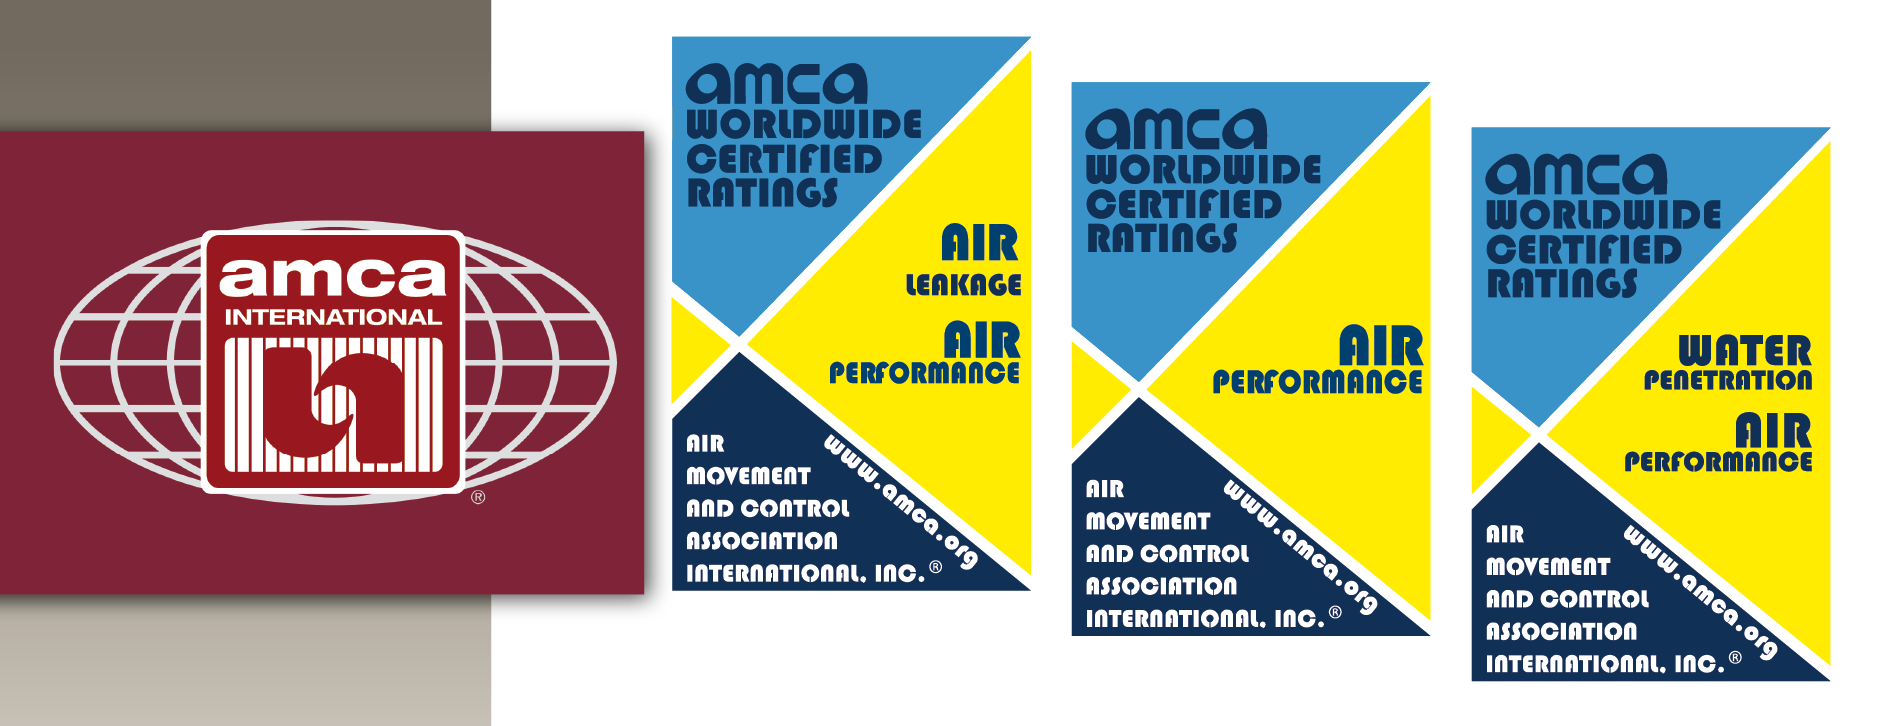 AMCA ratings seals show which tests have been completed